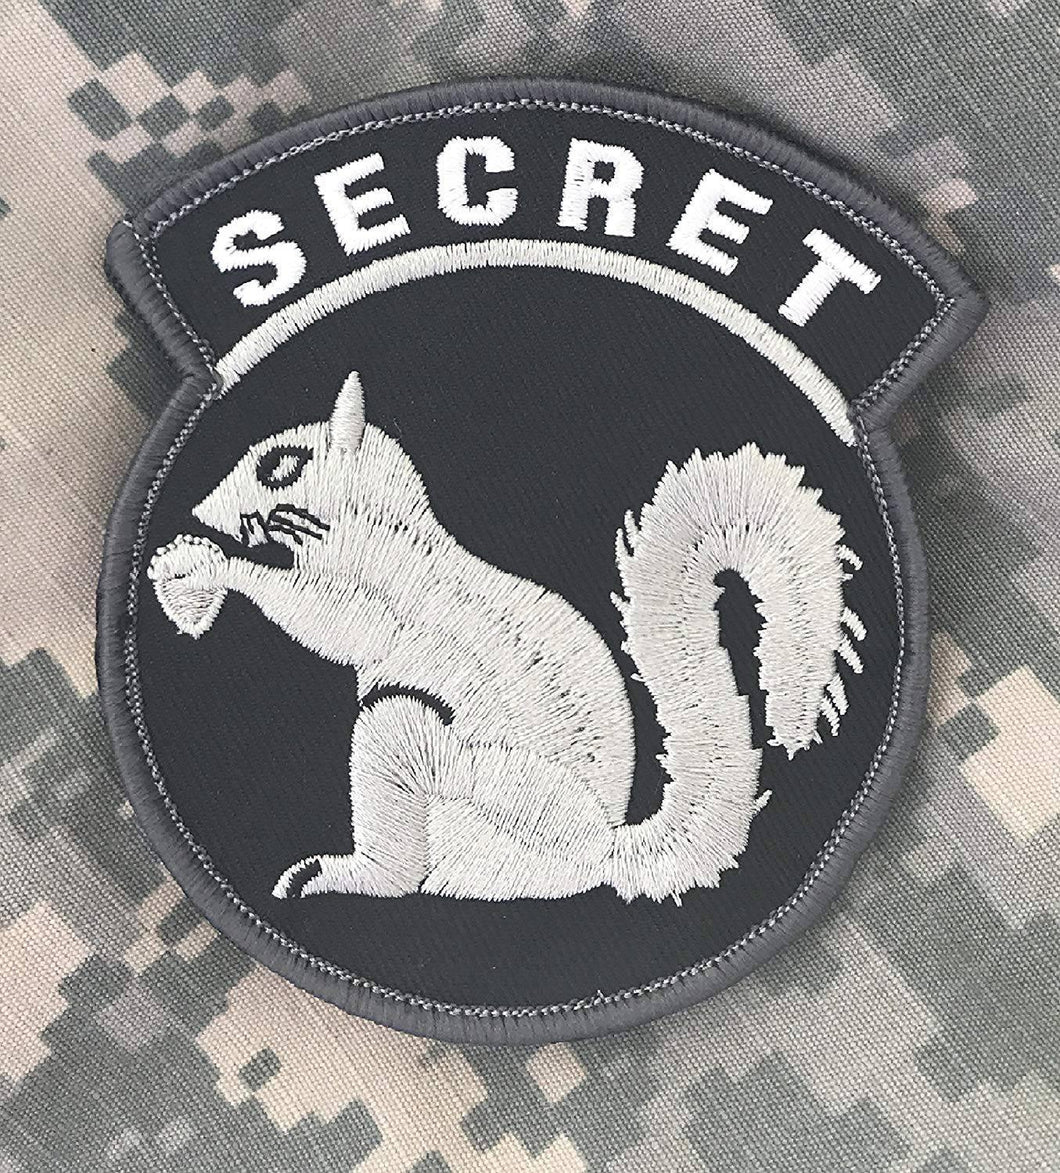 BuckUp Tactical Morale Patch Hook Secret Squirrel Black White PATCHES Patches 3